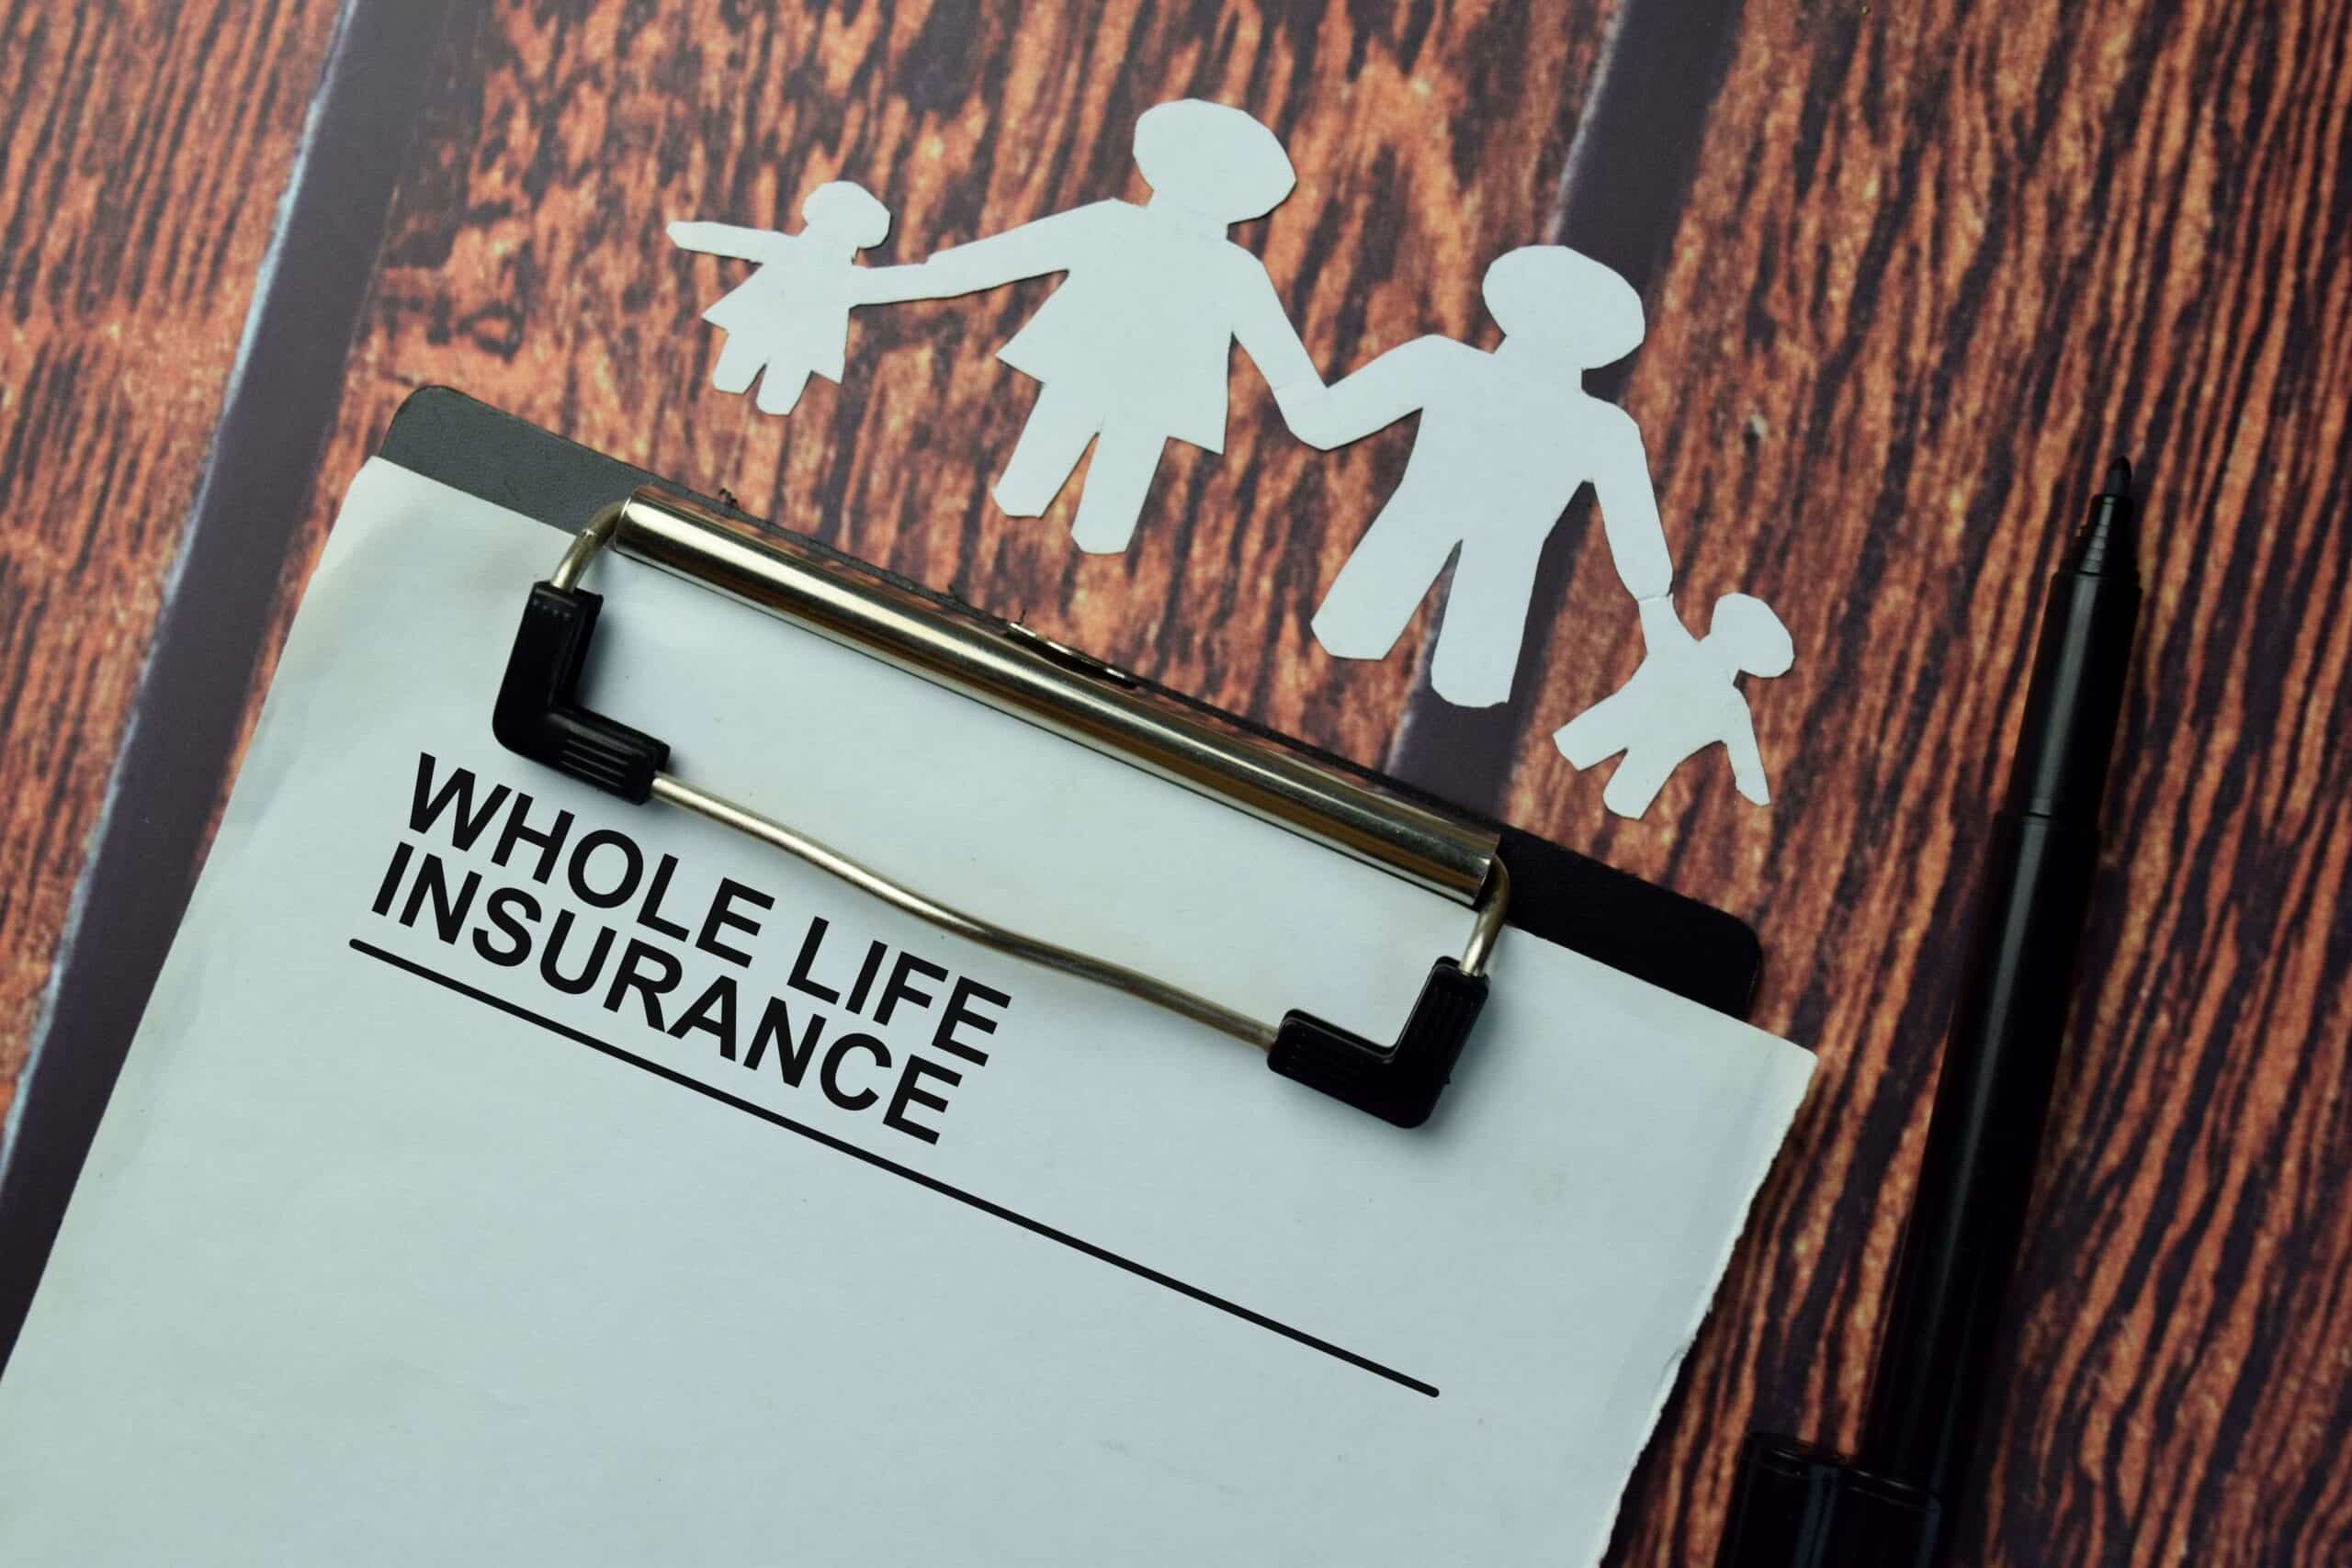 Clipboard that has a paper with whole life insurance on it